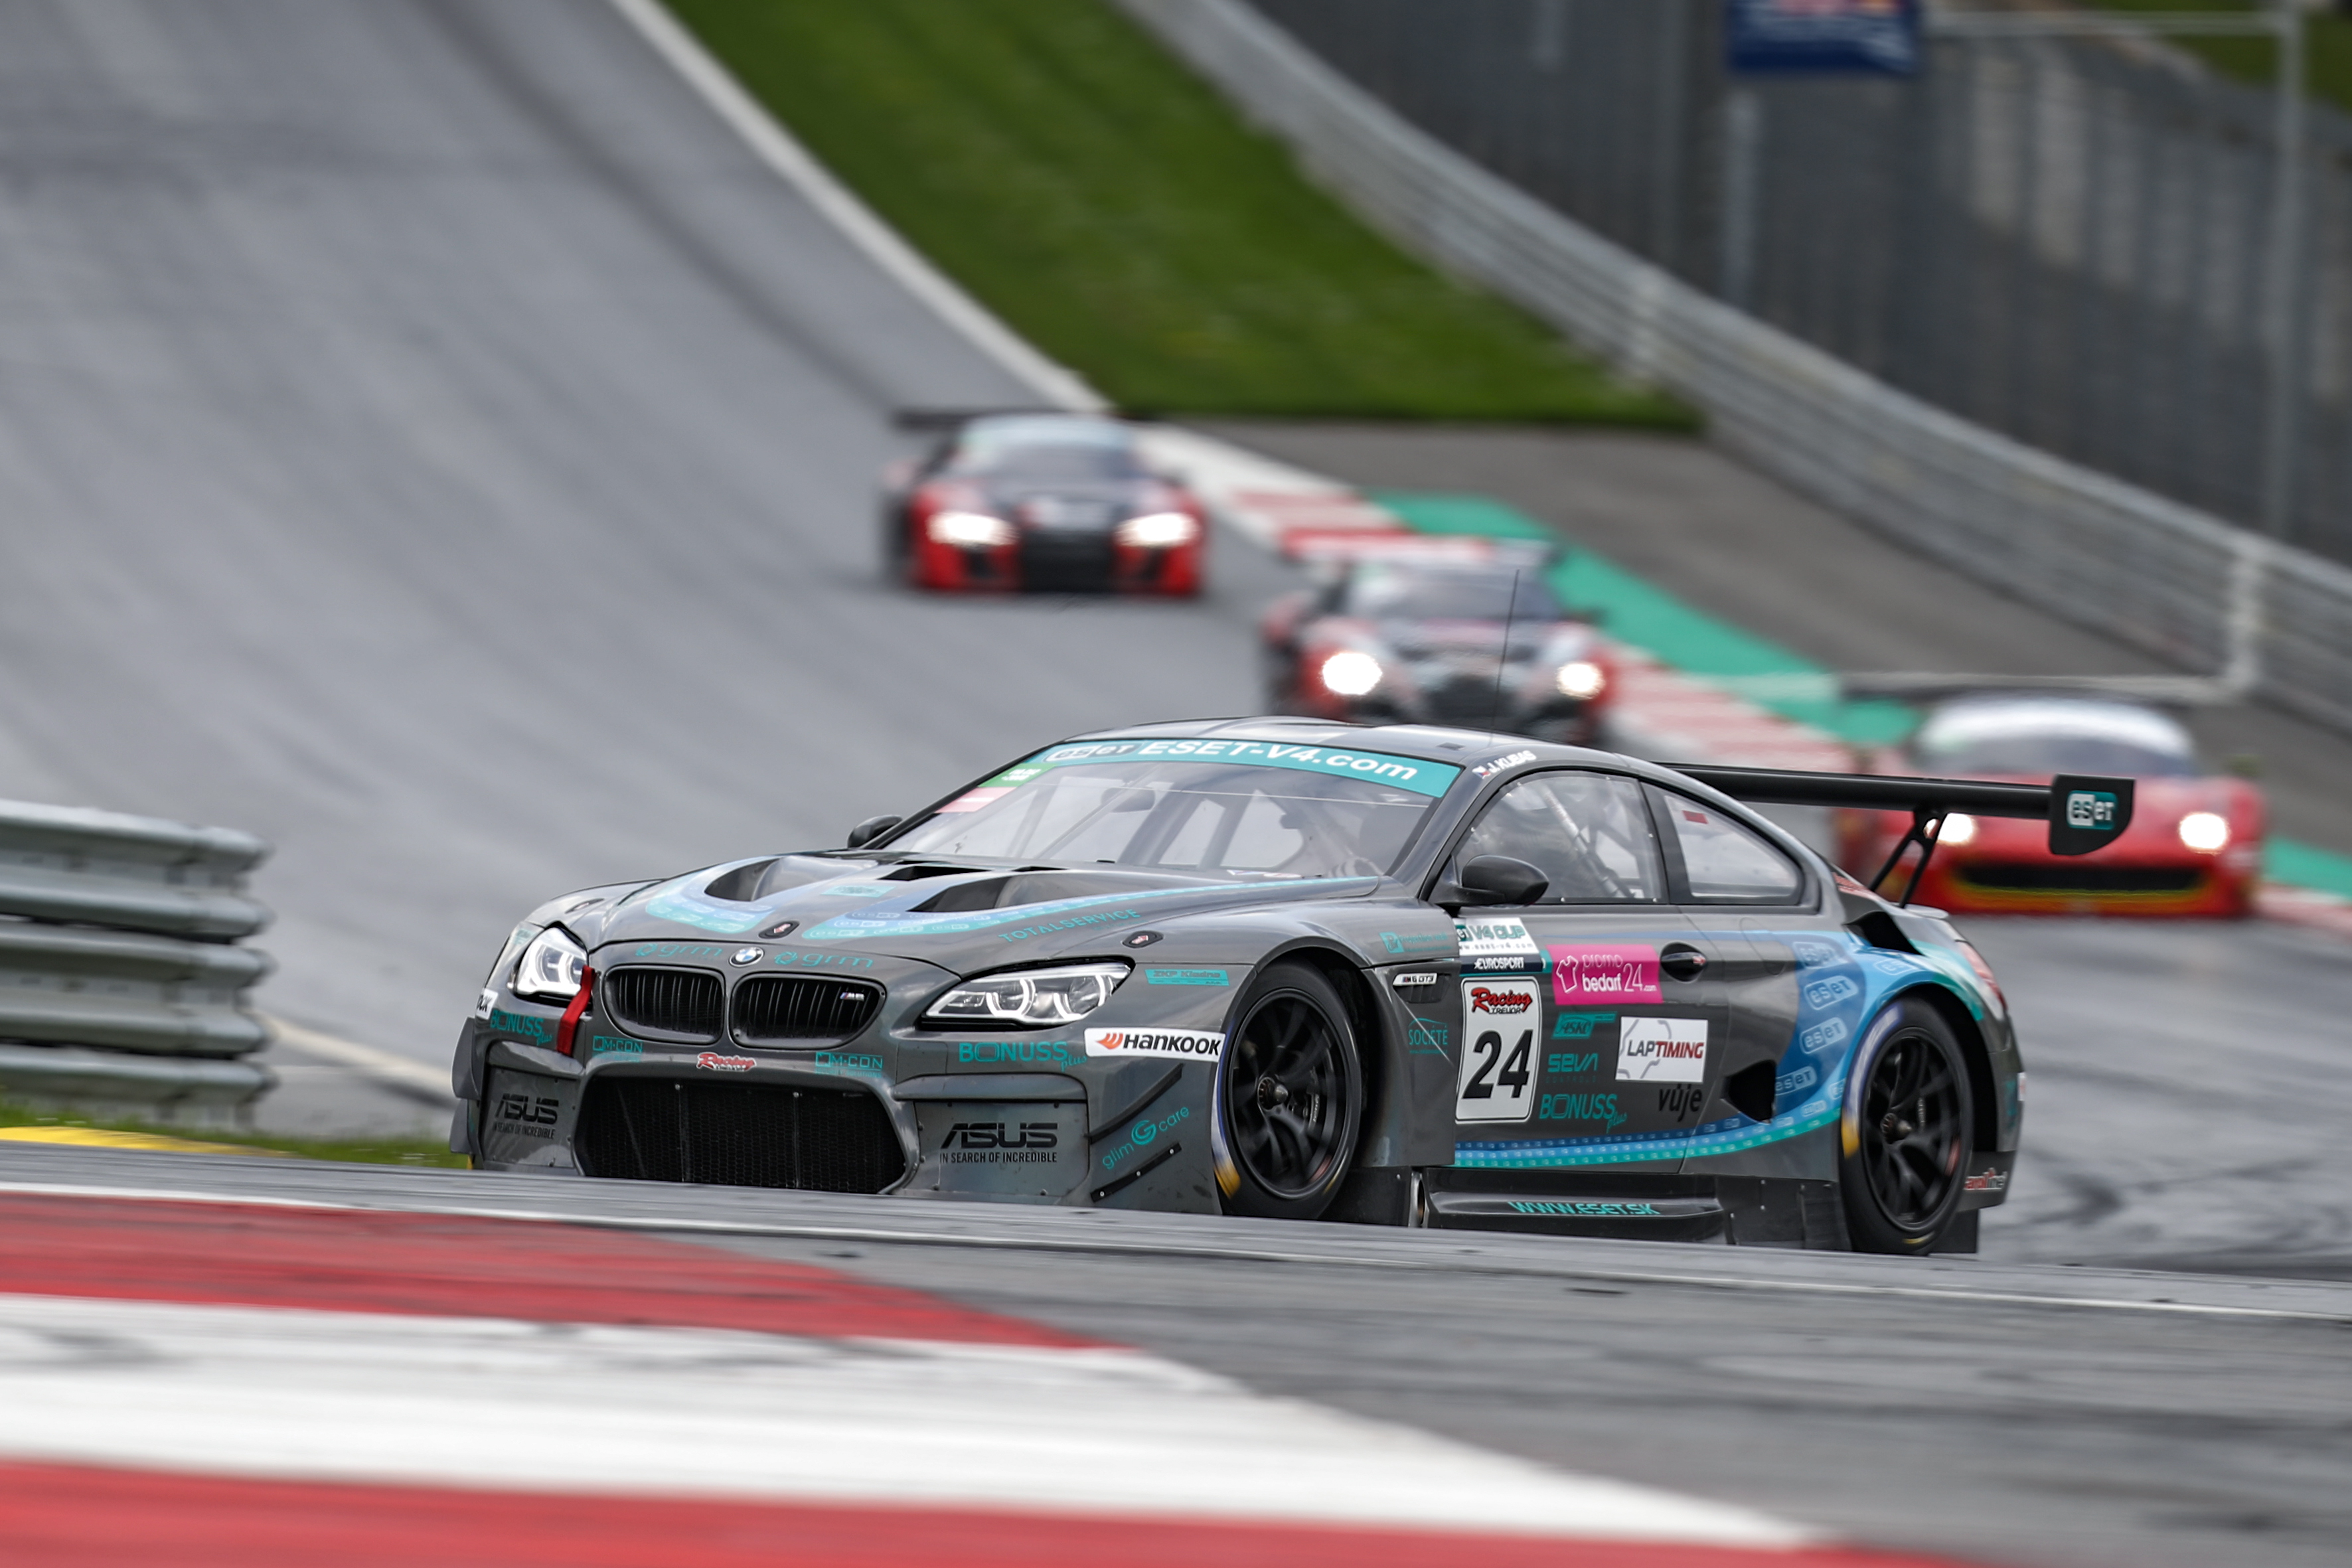 Circuit challenges of 2019 – Red Bull Ring